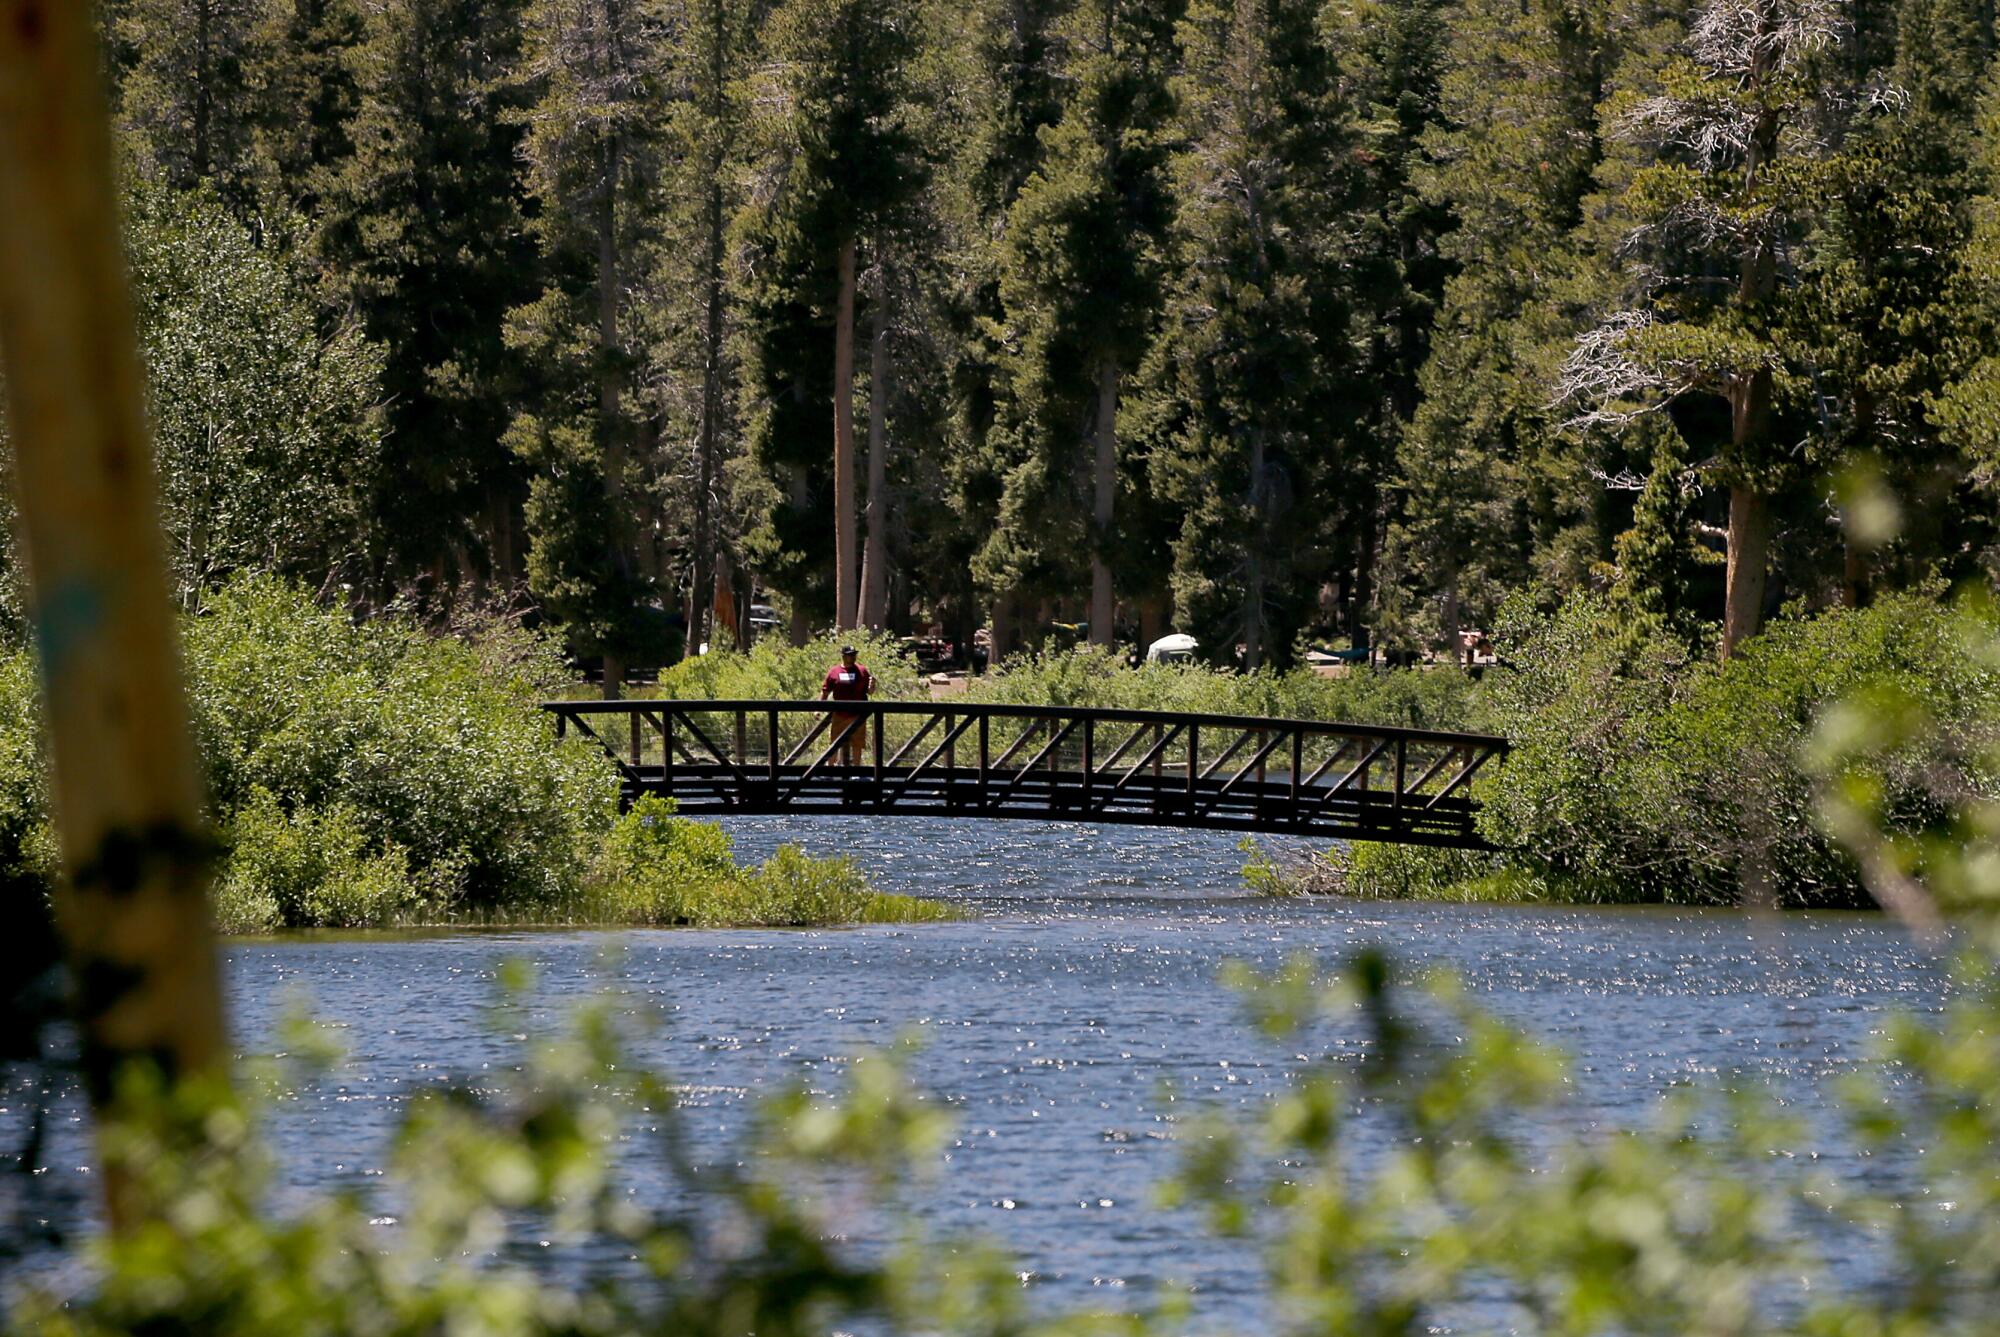 A visitor to Twin Lakes pauses on a footbridge to take in the scenery.